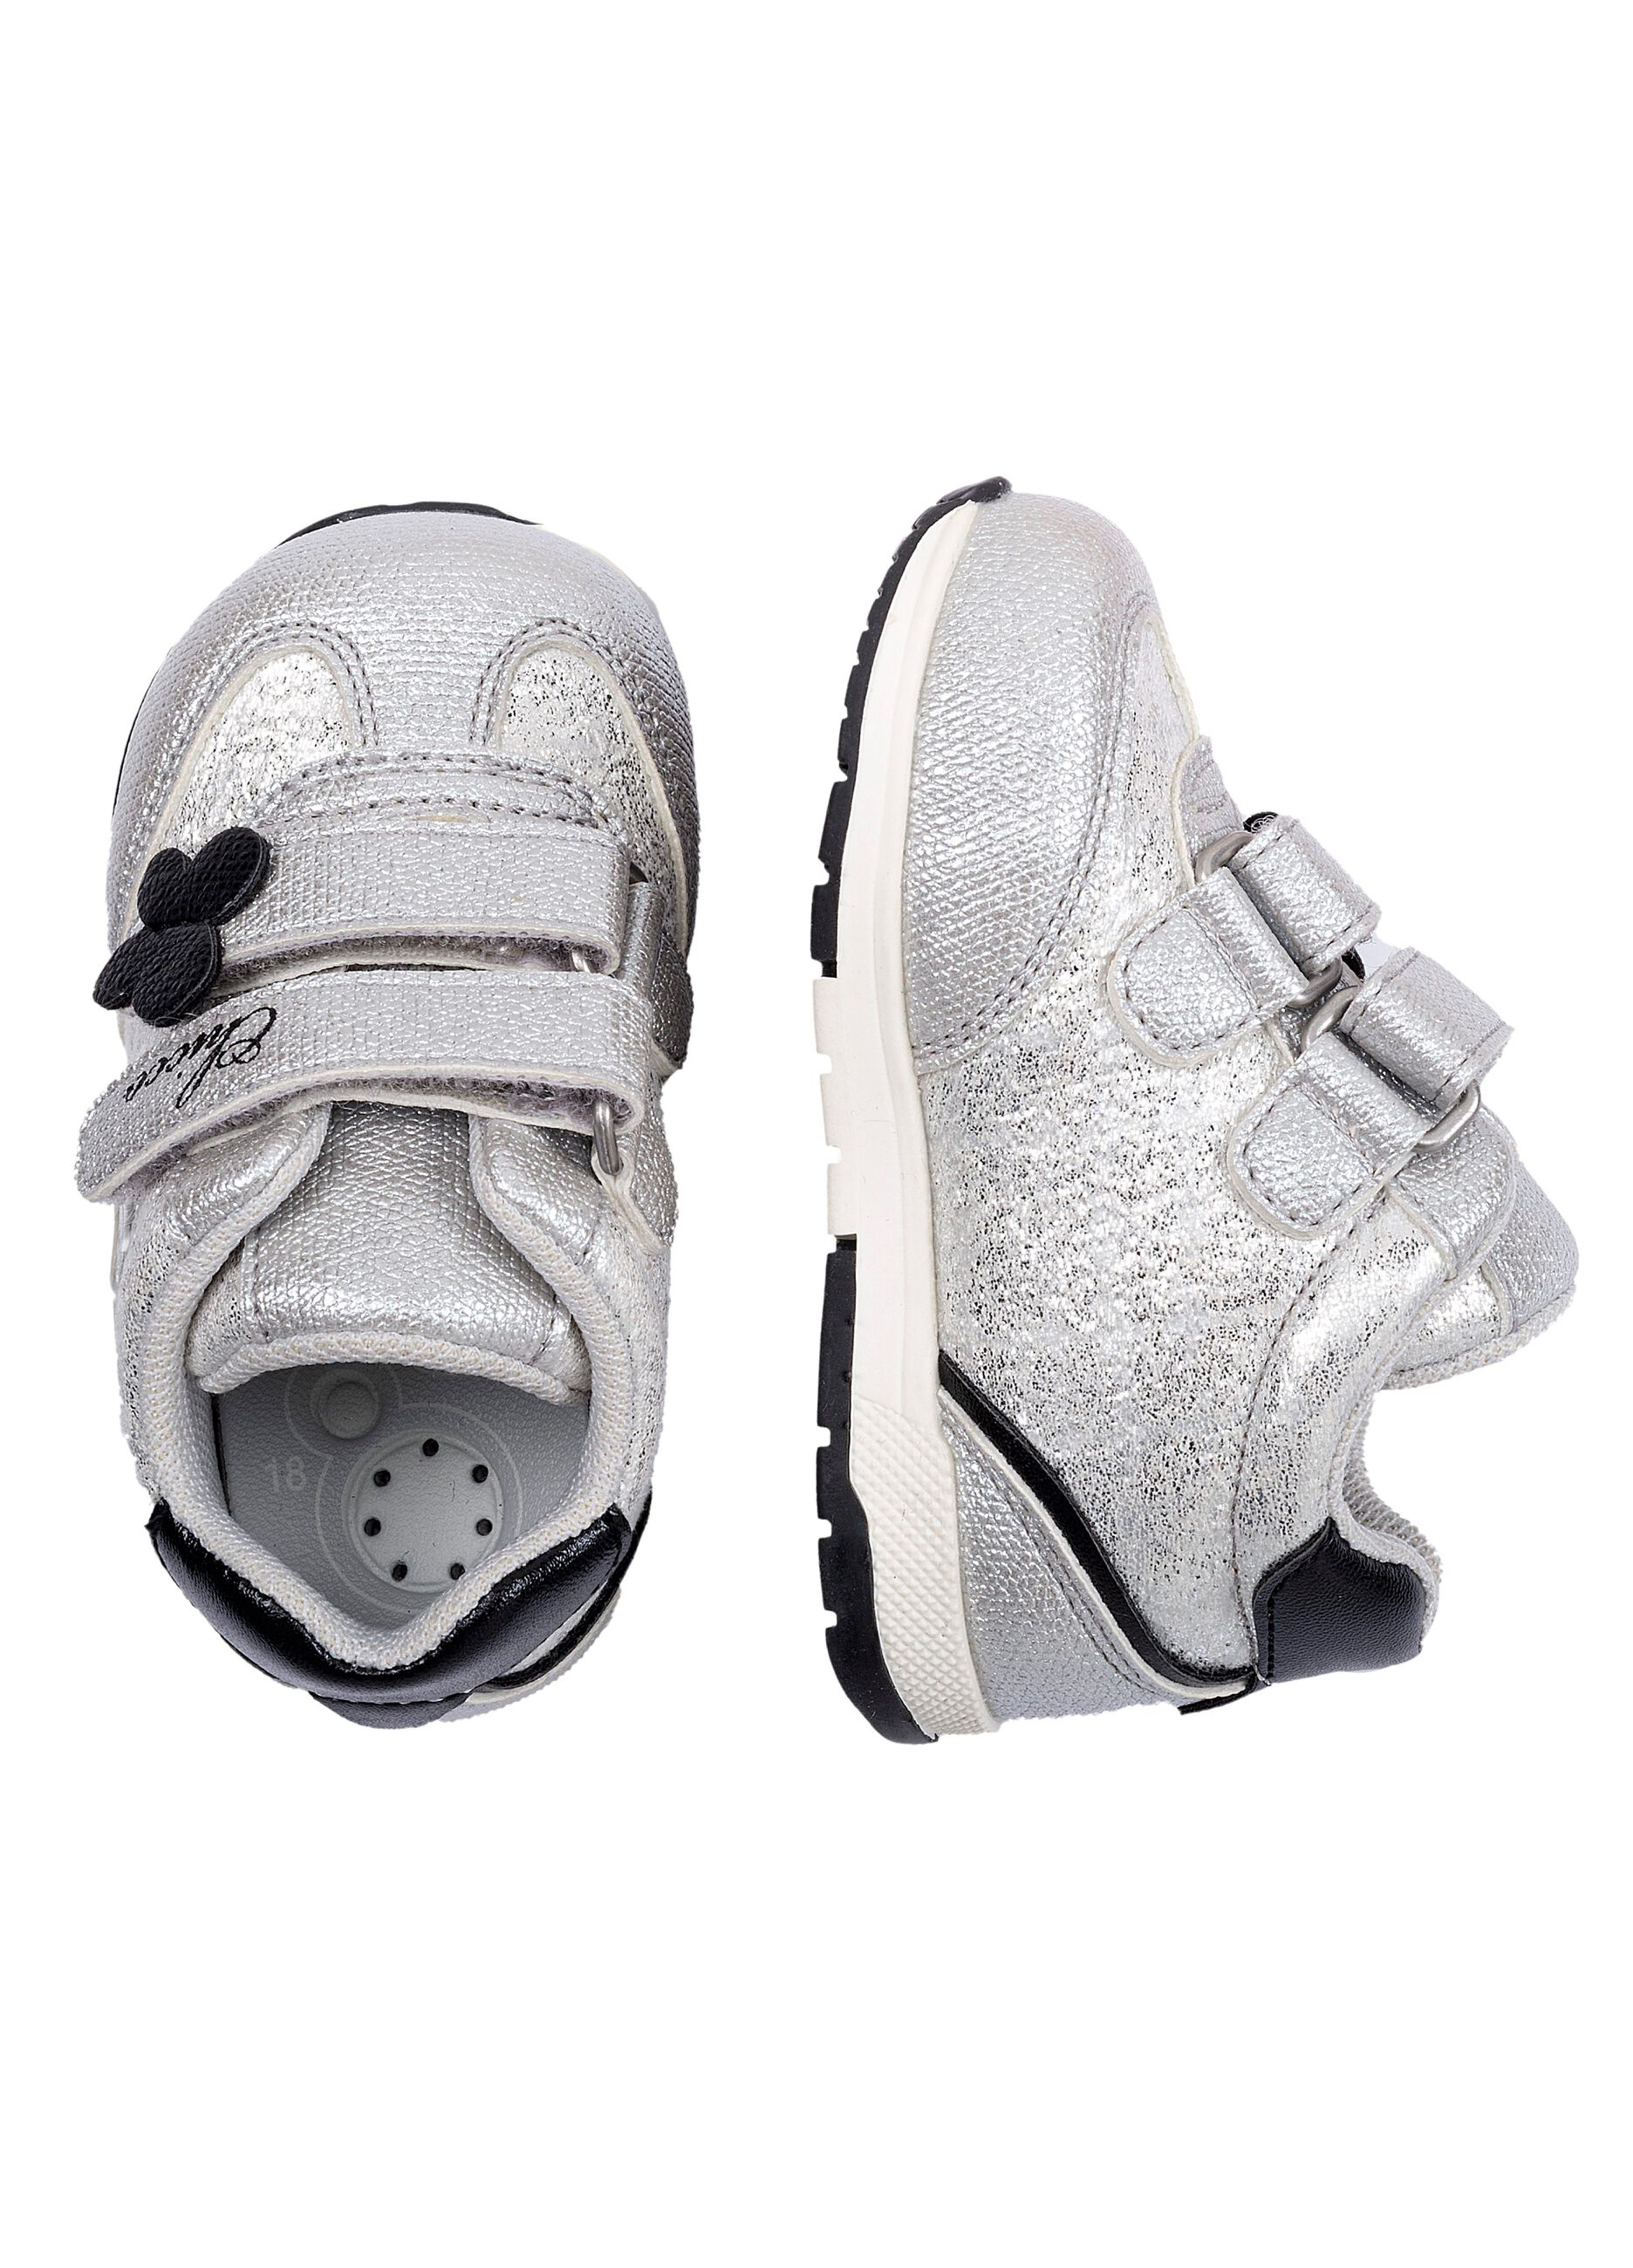 Chicco girls’ shoes